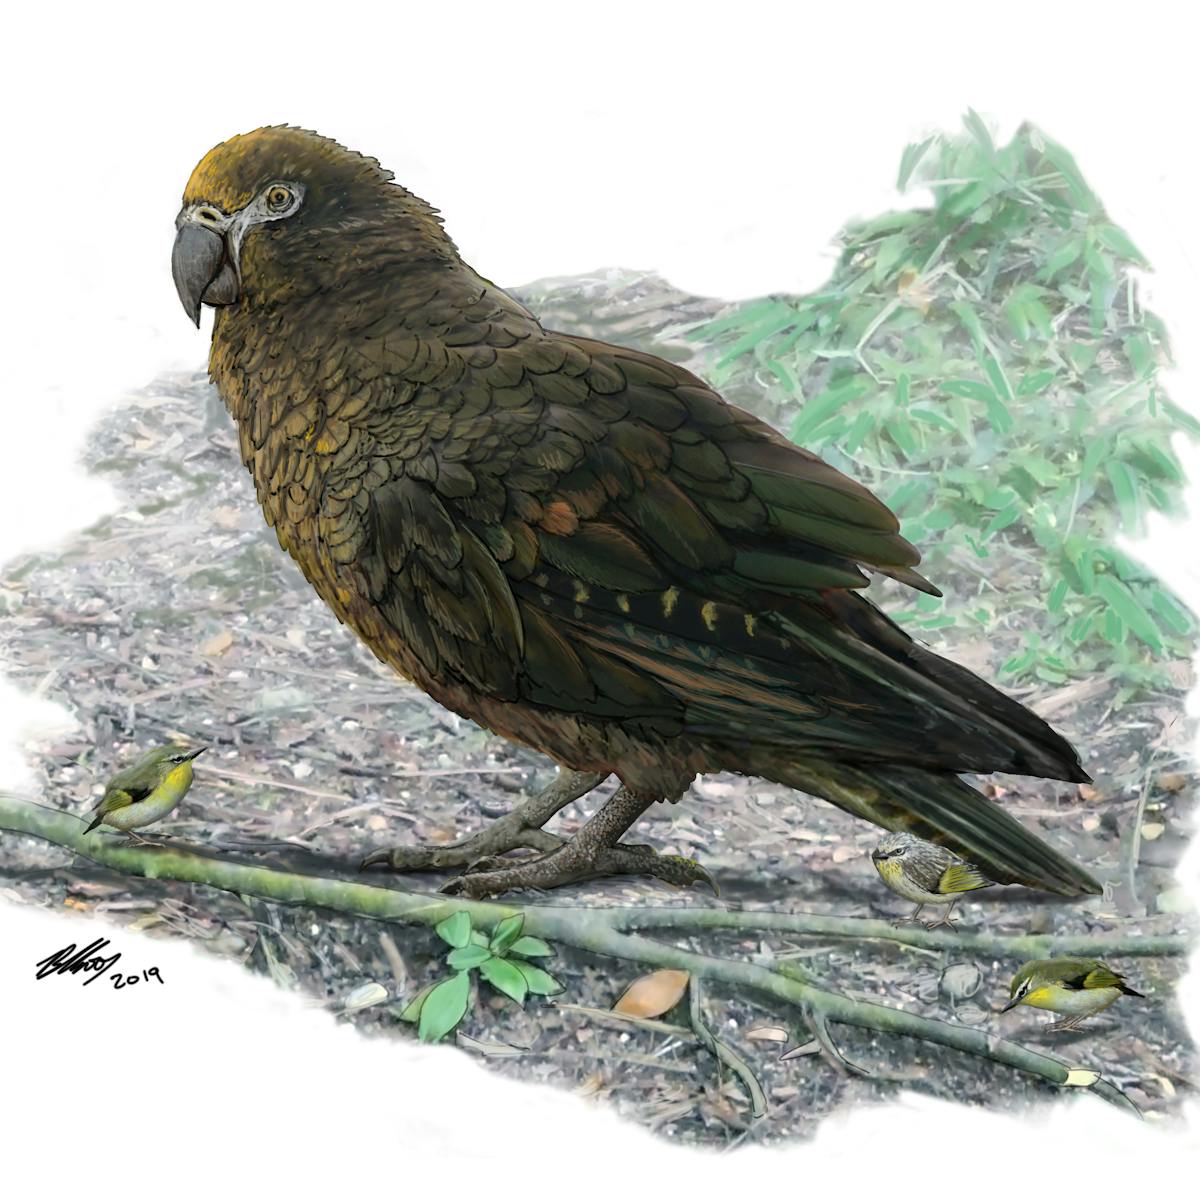 Meet The Hercules Parrot From Prehistoric New Zealand The